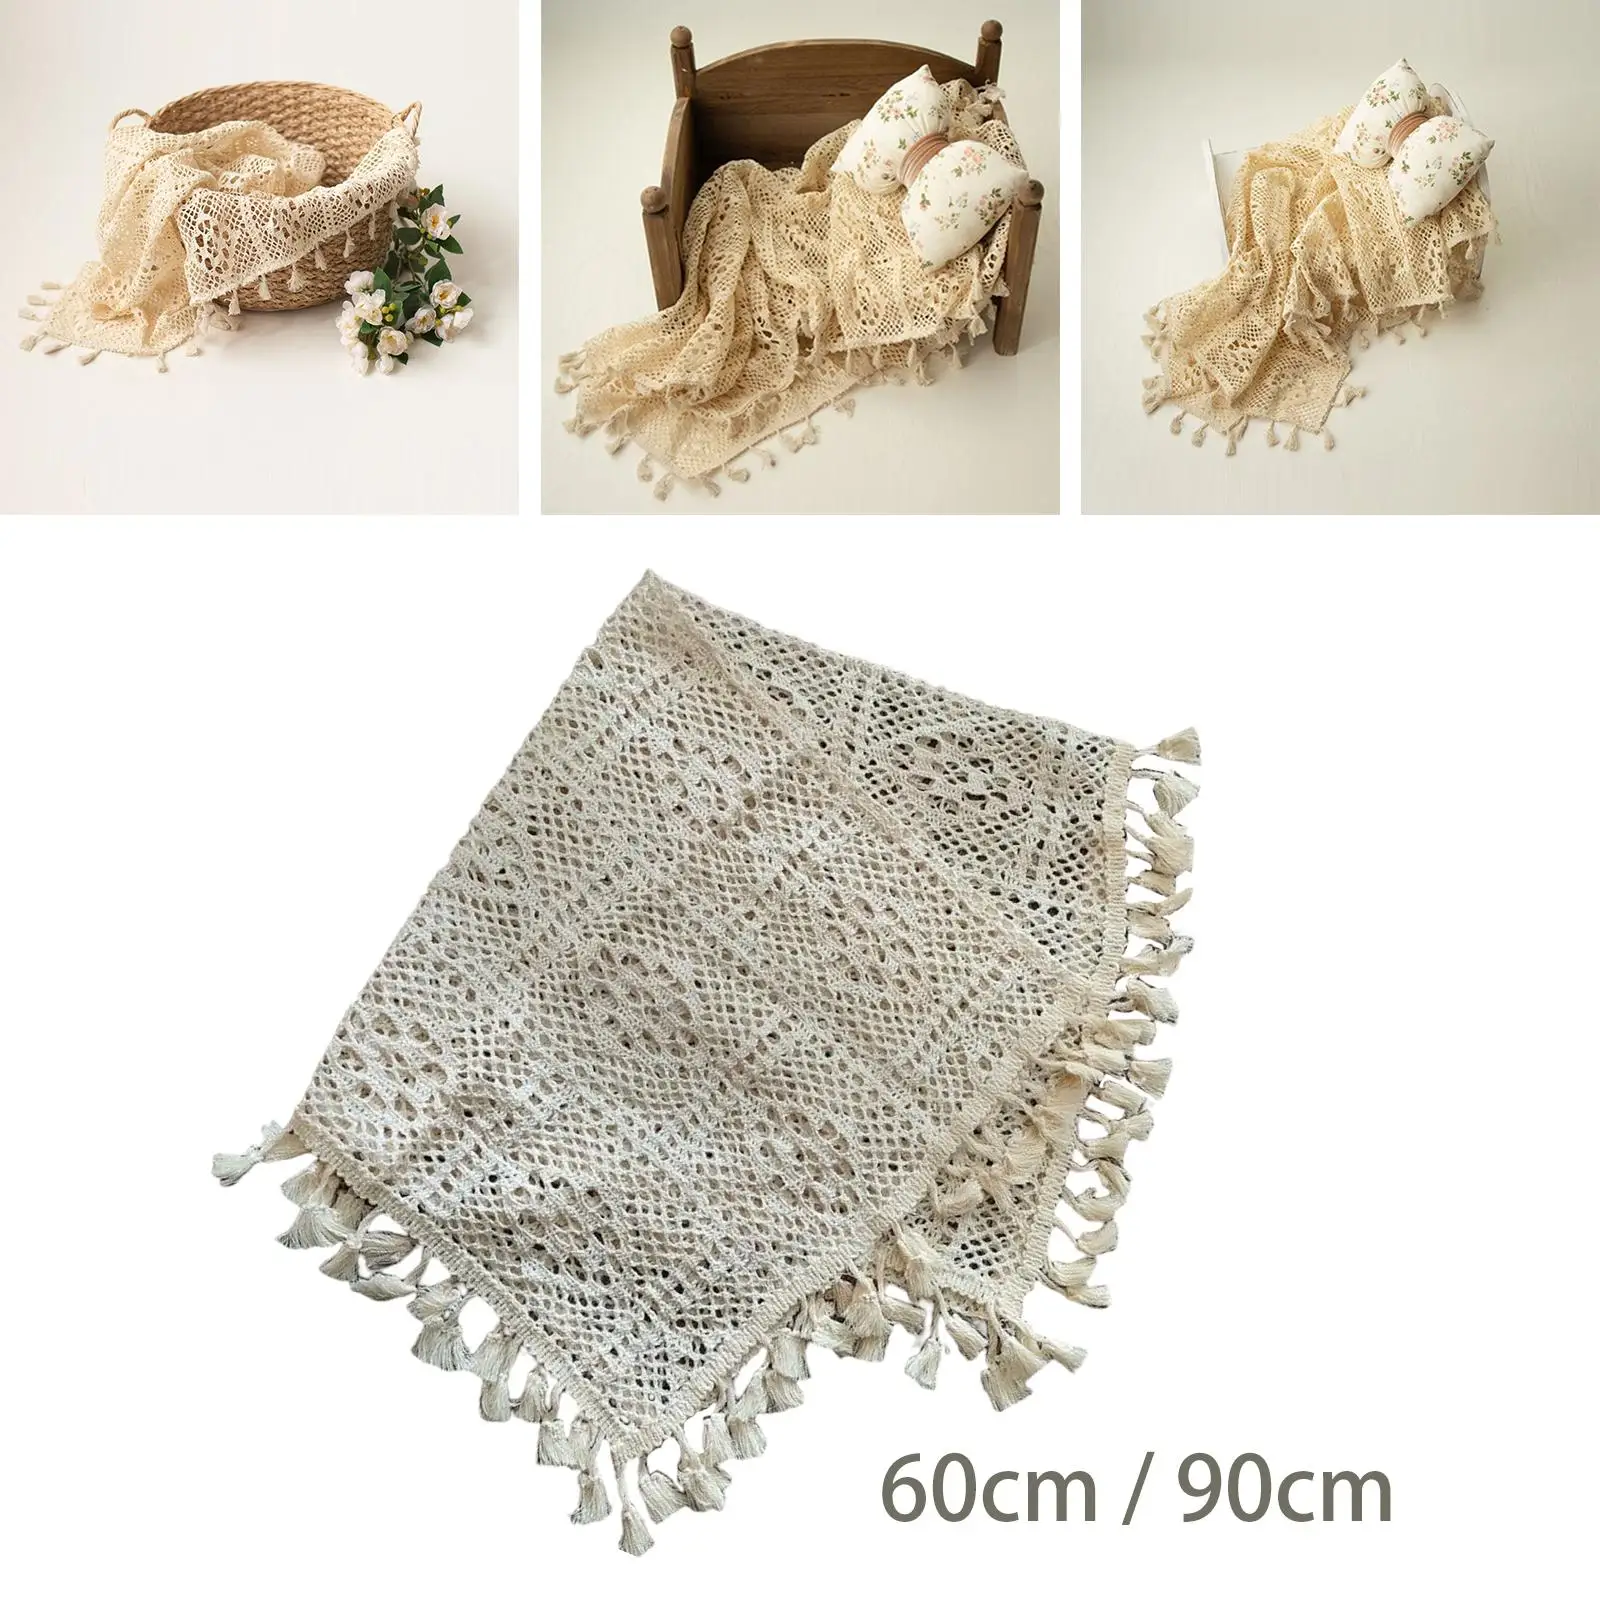 Hollow Weaving Photo Prop Blanket Photo Shooting Accessories Cotton Thread Photography Wrapping Towel Decorative Tassel Blanket